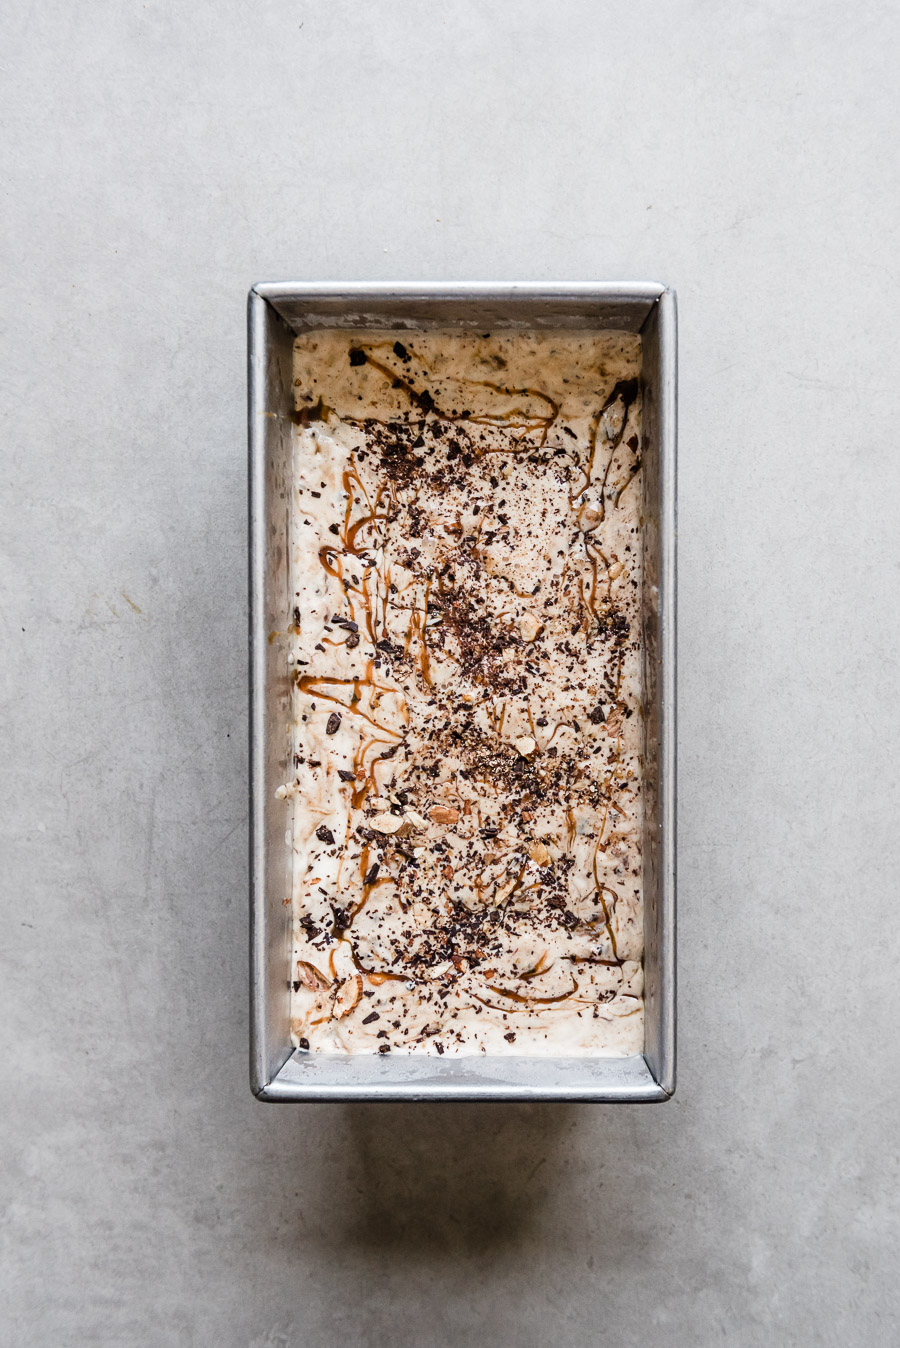 Salted Caramel Ice Cream with Chocolate Chunks & Almonds | Gather a Table